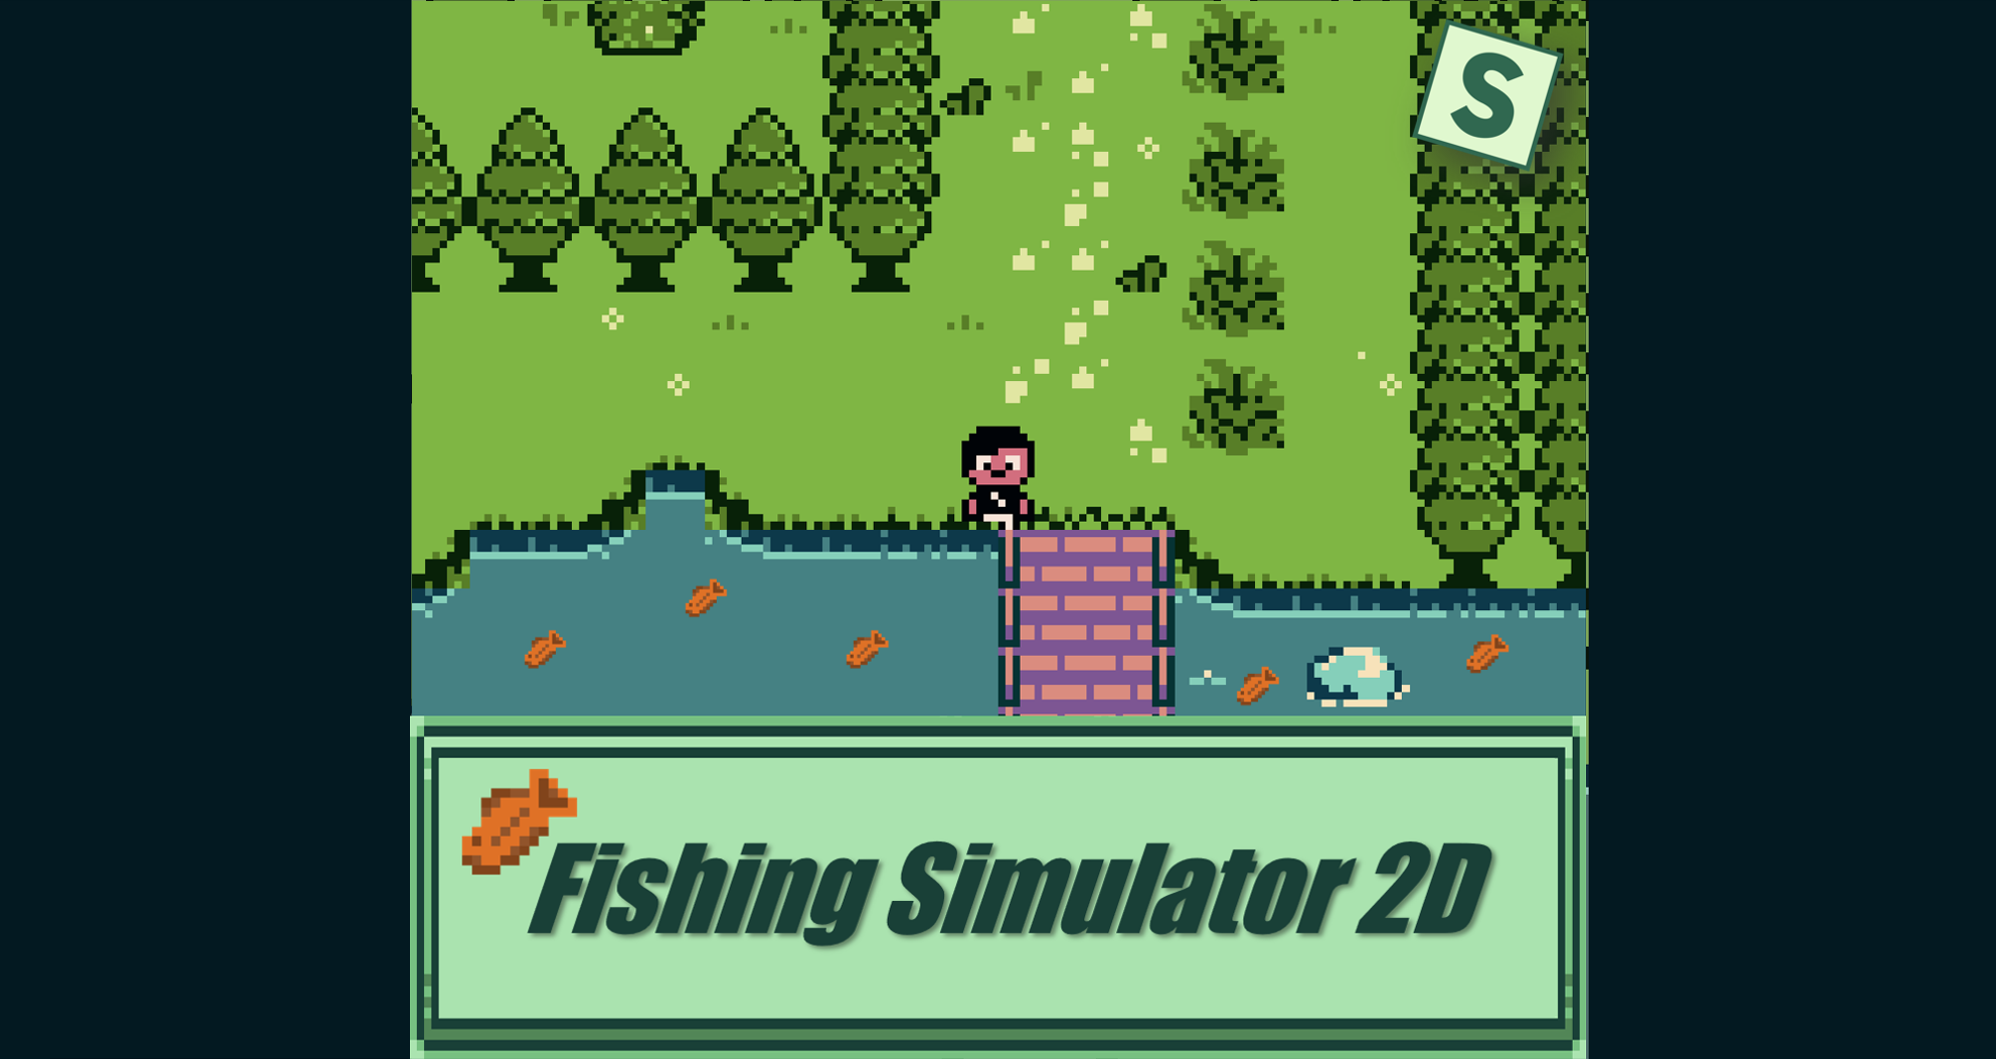 Fishing Simulator 2D by Silent Earth Games